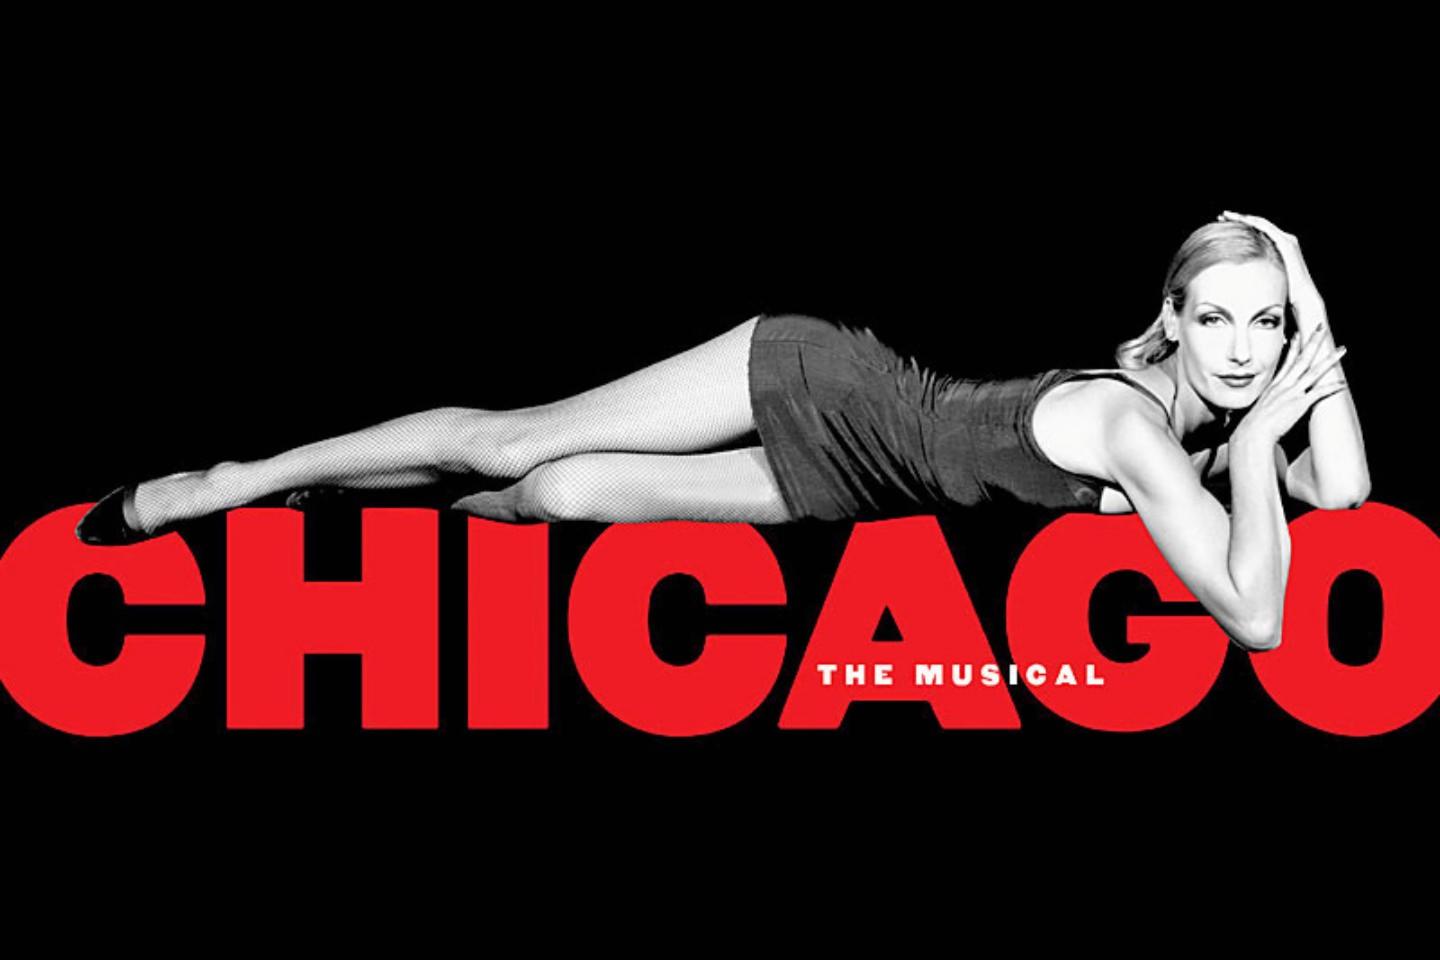 Chicago - Tour Tickets | Buy or Sell Chicago - Tour Tour 2021 Tickets